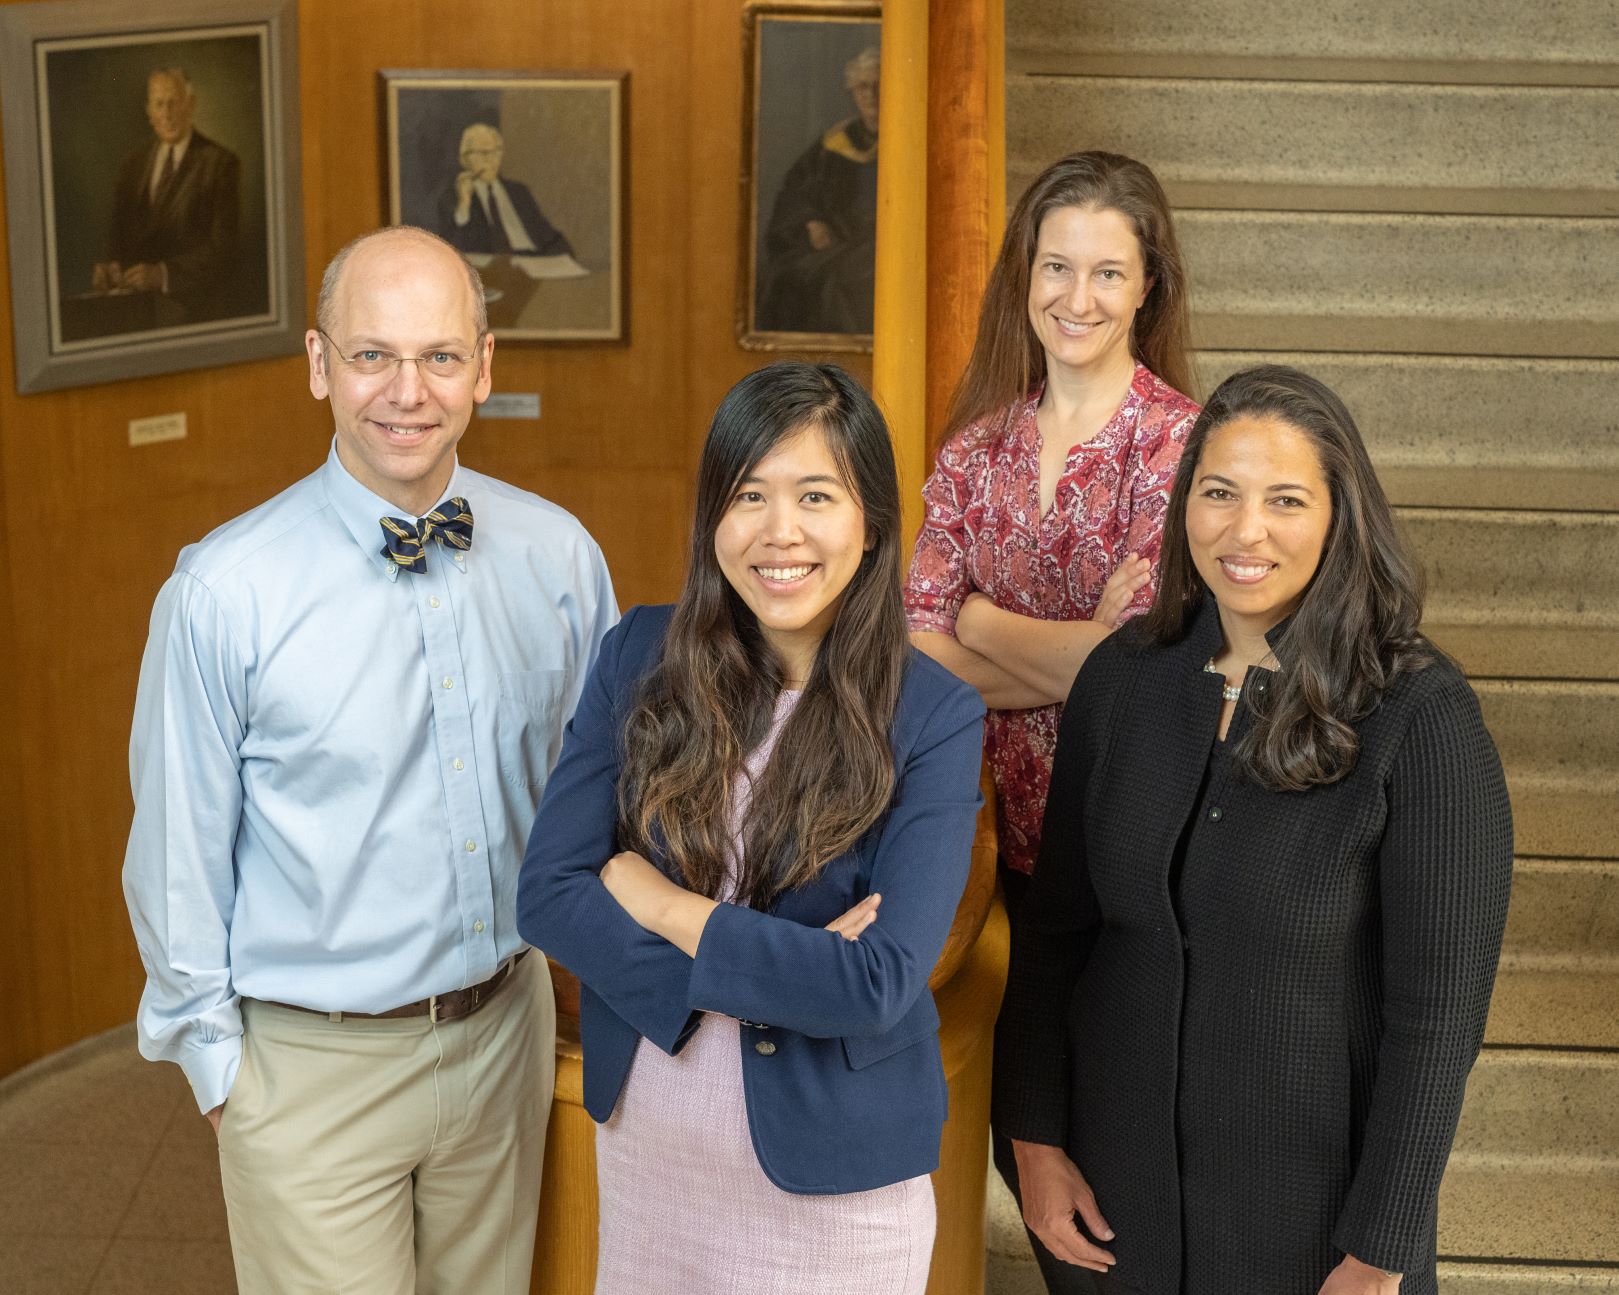 Pictured Above from Left to Right: Dr. Michael Fialkow (Division Chief), Dr. Olivia Chang, Dr. Anna Kirby, Dr. Blair Washington